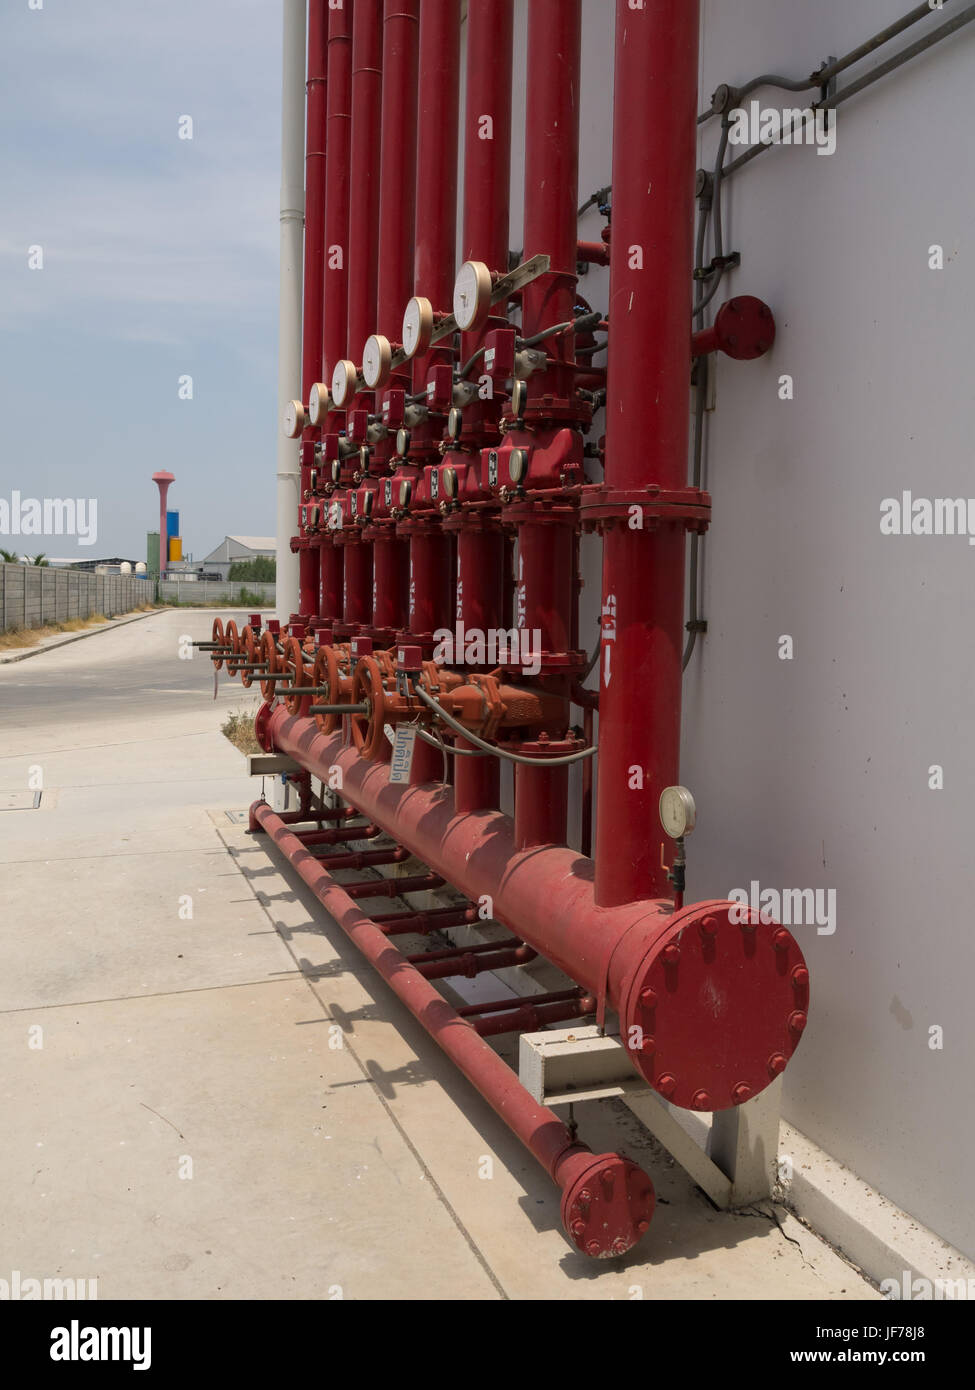 https://c8.alamy.com/comp/JF78J8/a-row-of-red-color-fire-fighting-water-supply-pipeline-system-JF78J8.jpg